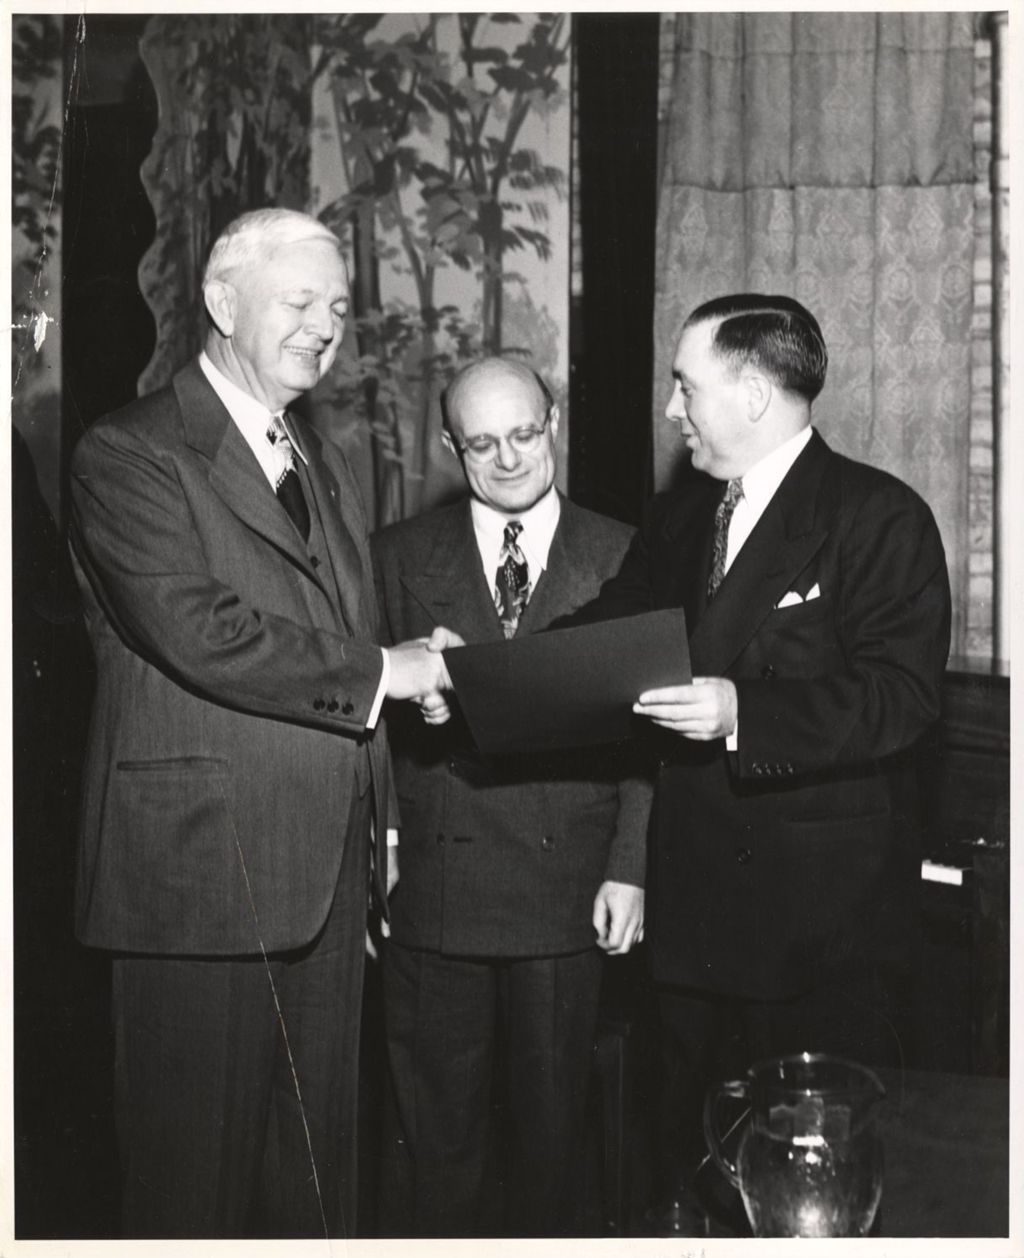 Martin Kennelly shaking hands with Richard J. Daley